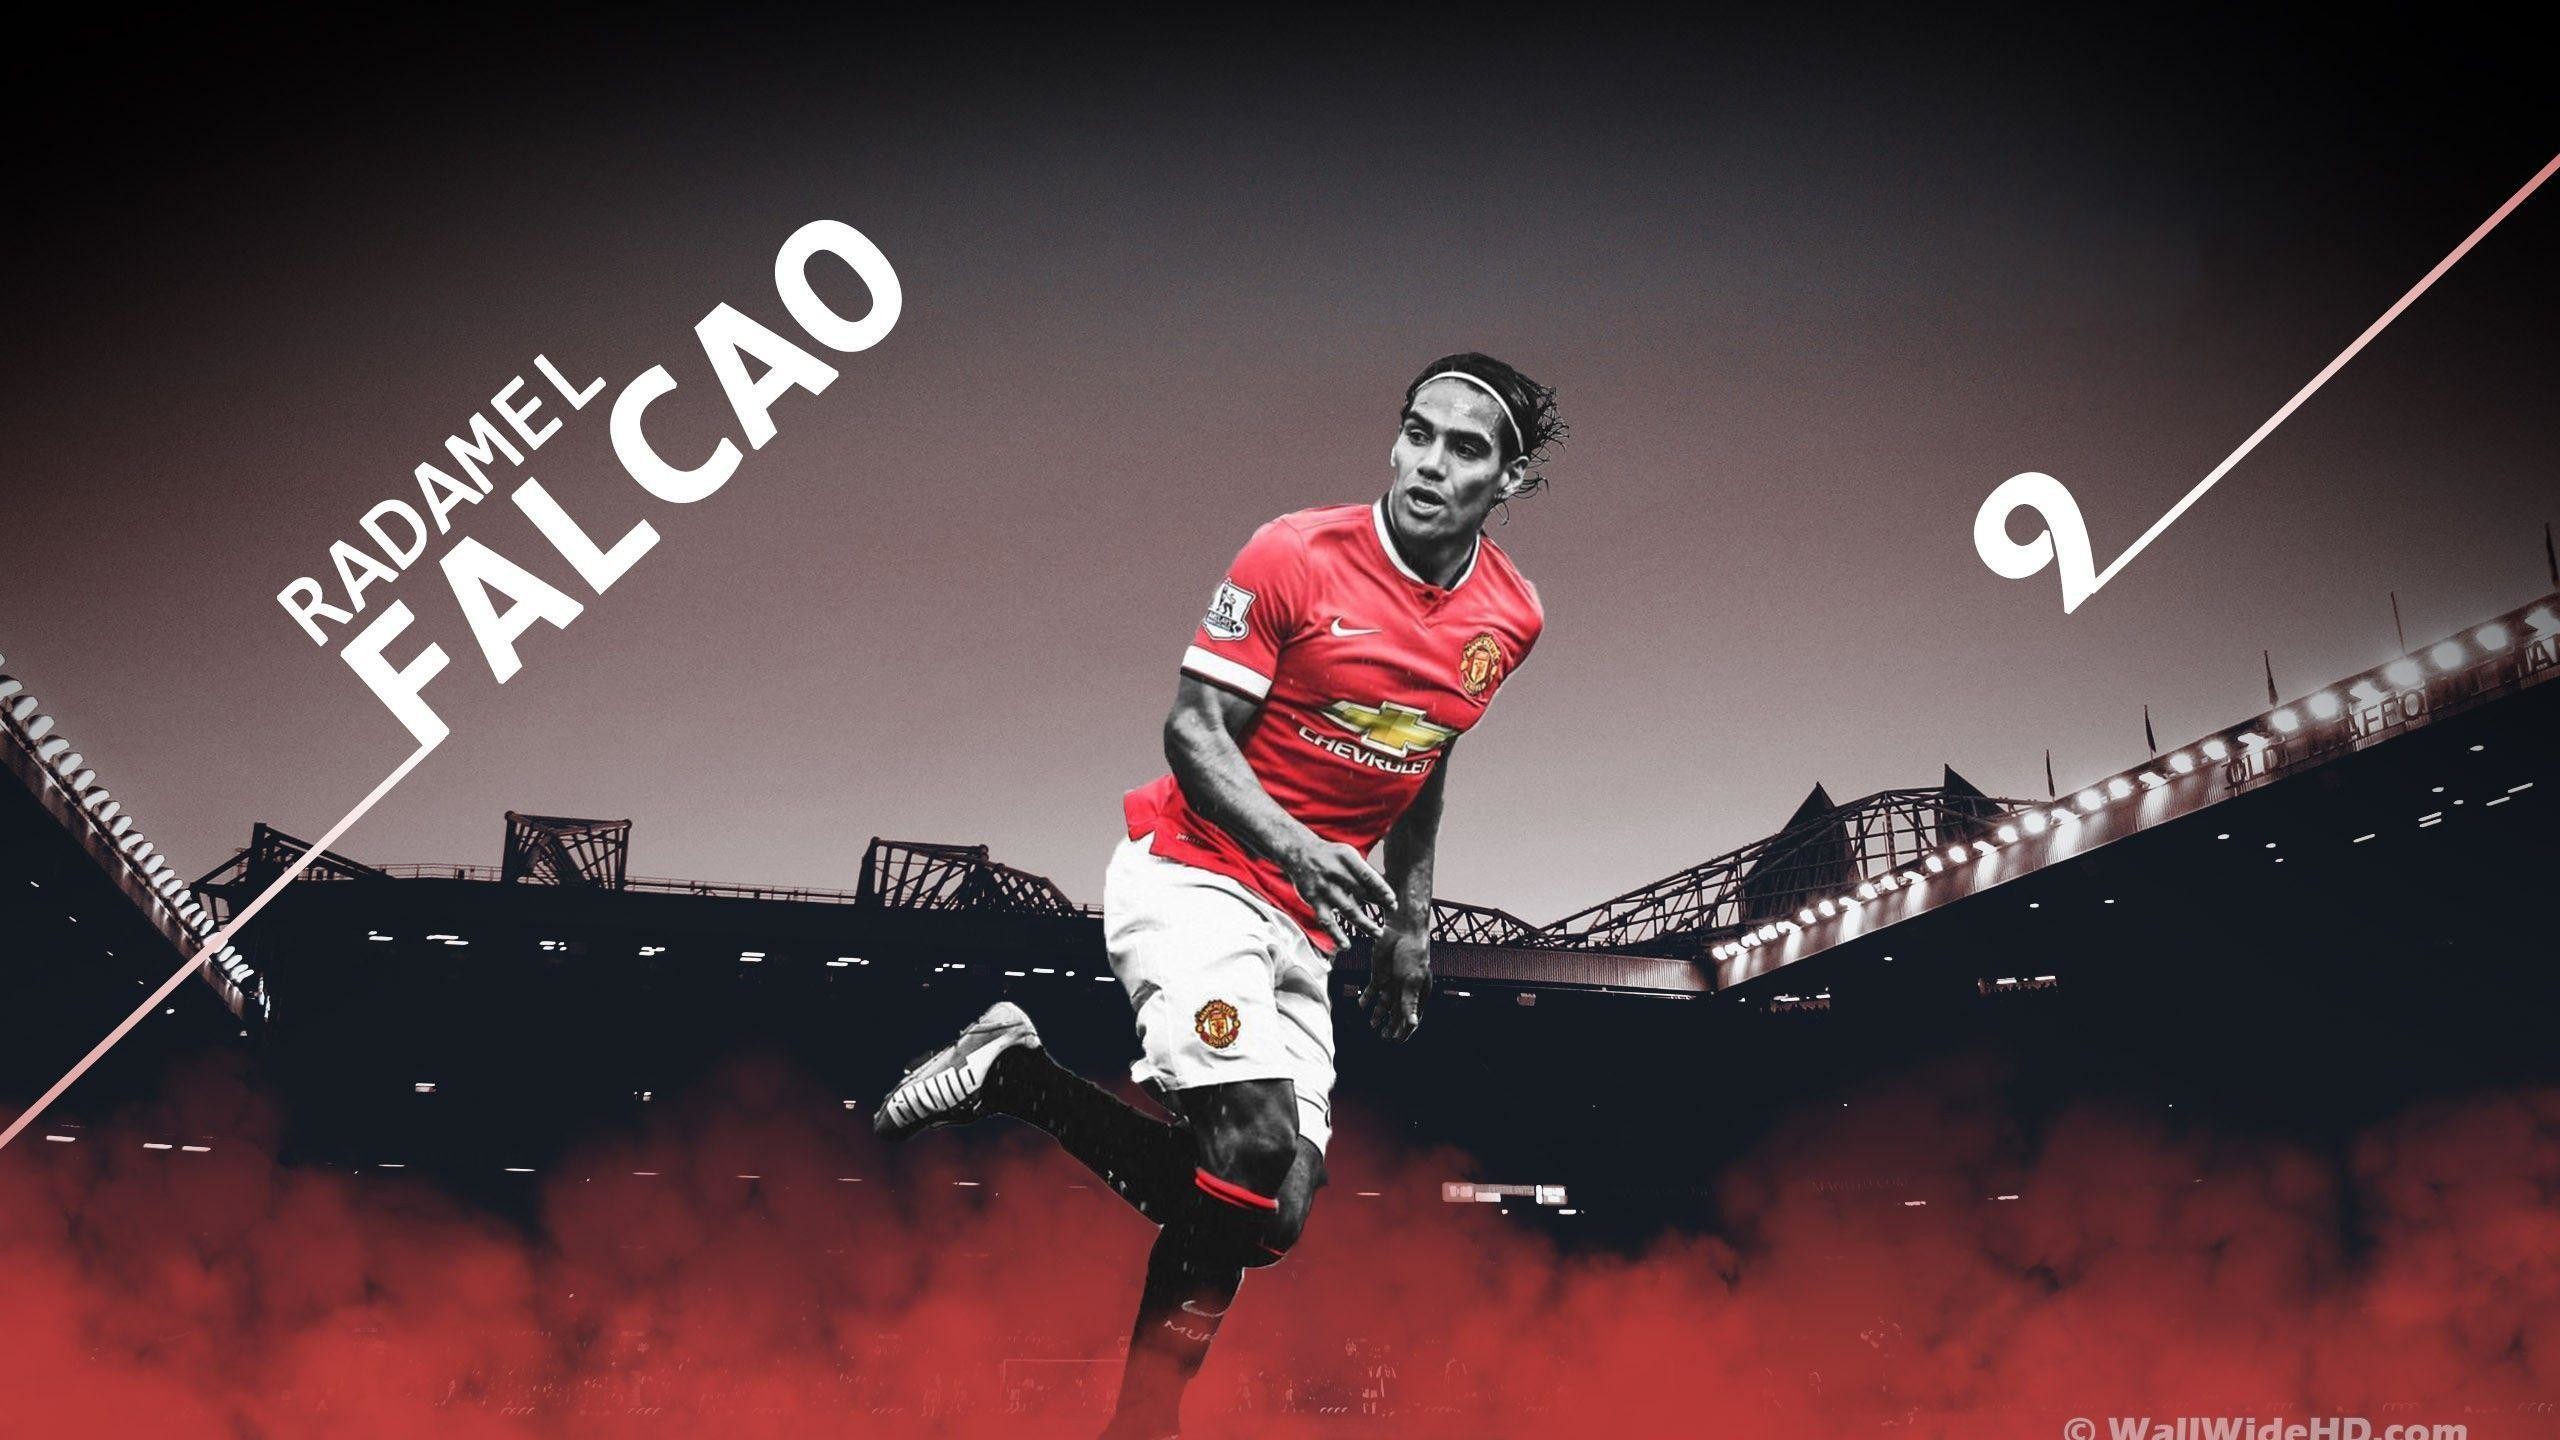 2560x1440 Manchester United Logo Wallpapers HD 2015 - Wallpaper Cave